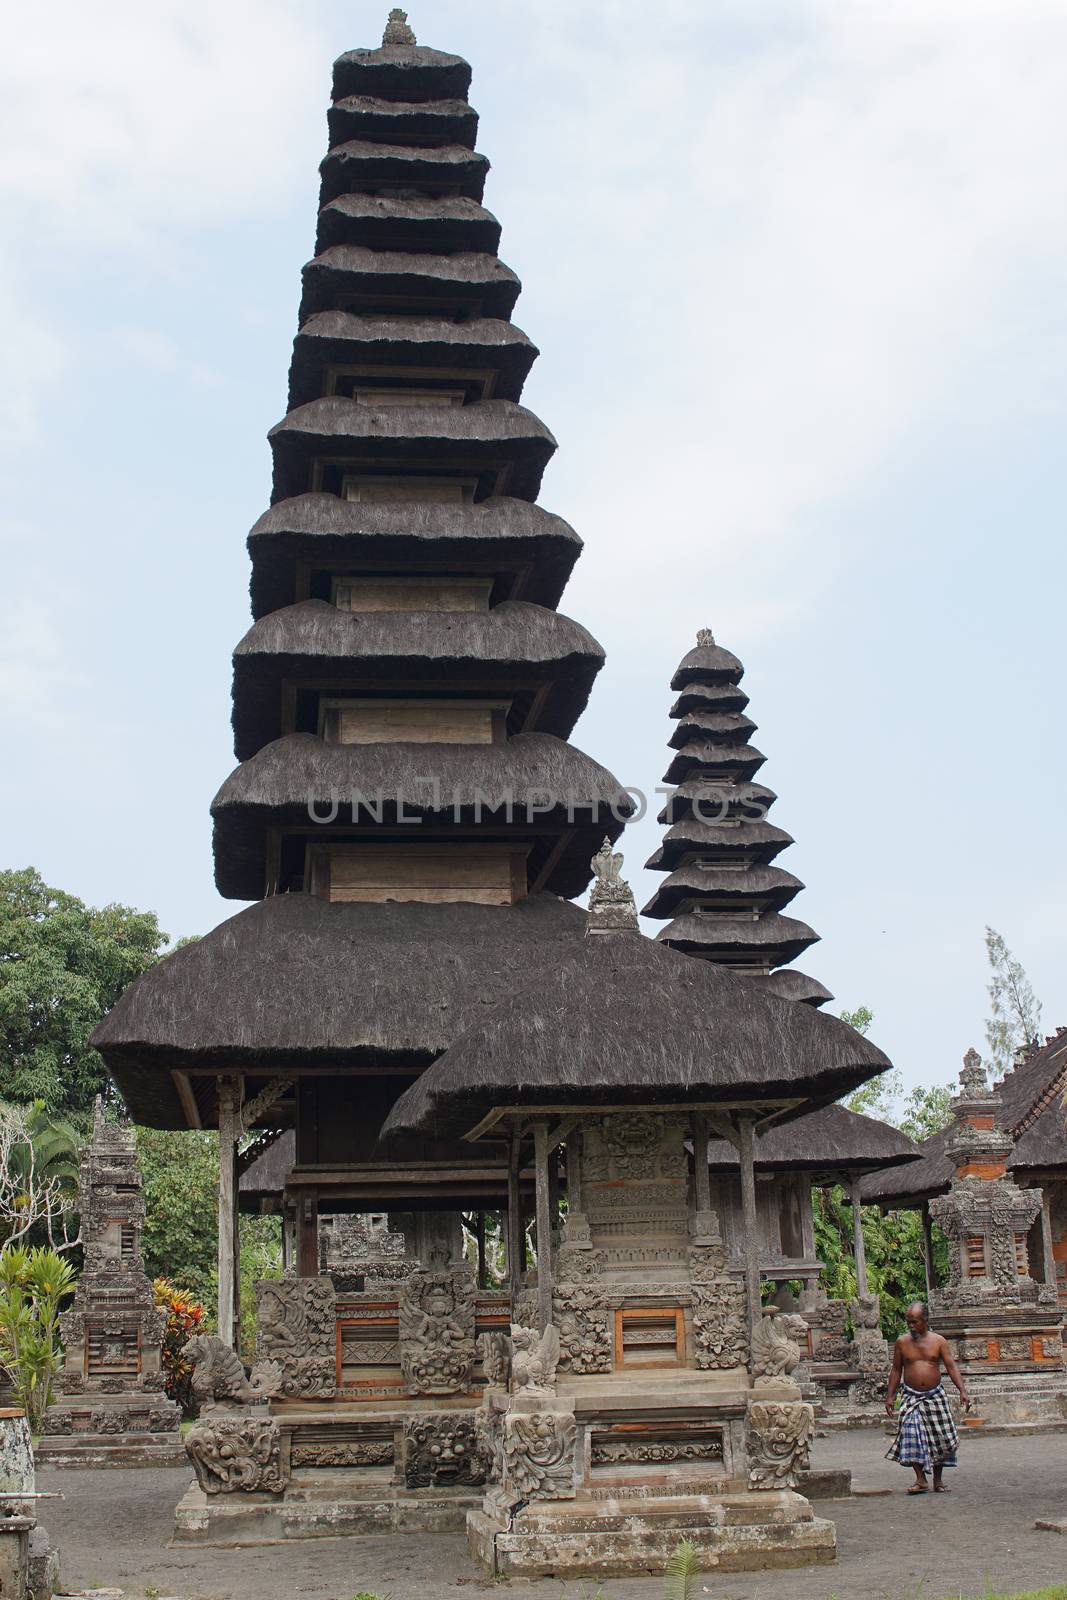 BALI, INDONESIA - SEPTEMBER 29, 2015: Pura Taman Ayun, one of the most important temples of Bali on September 29, 2015 in Mengwi, Indonesia